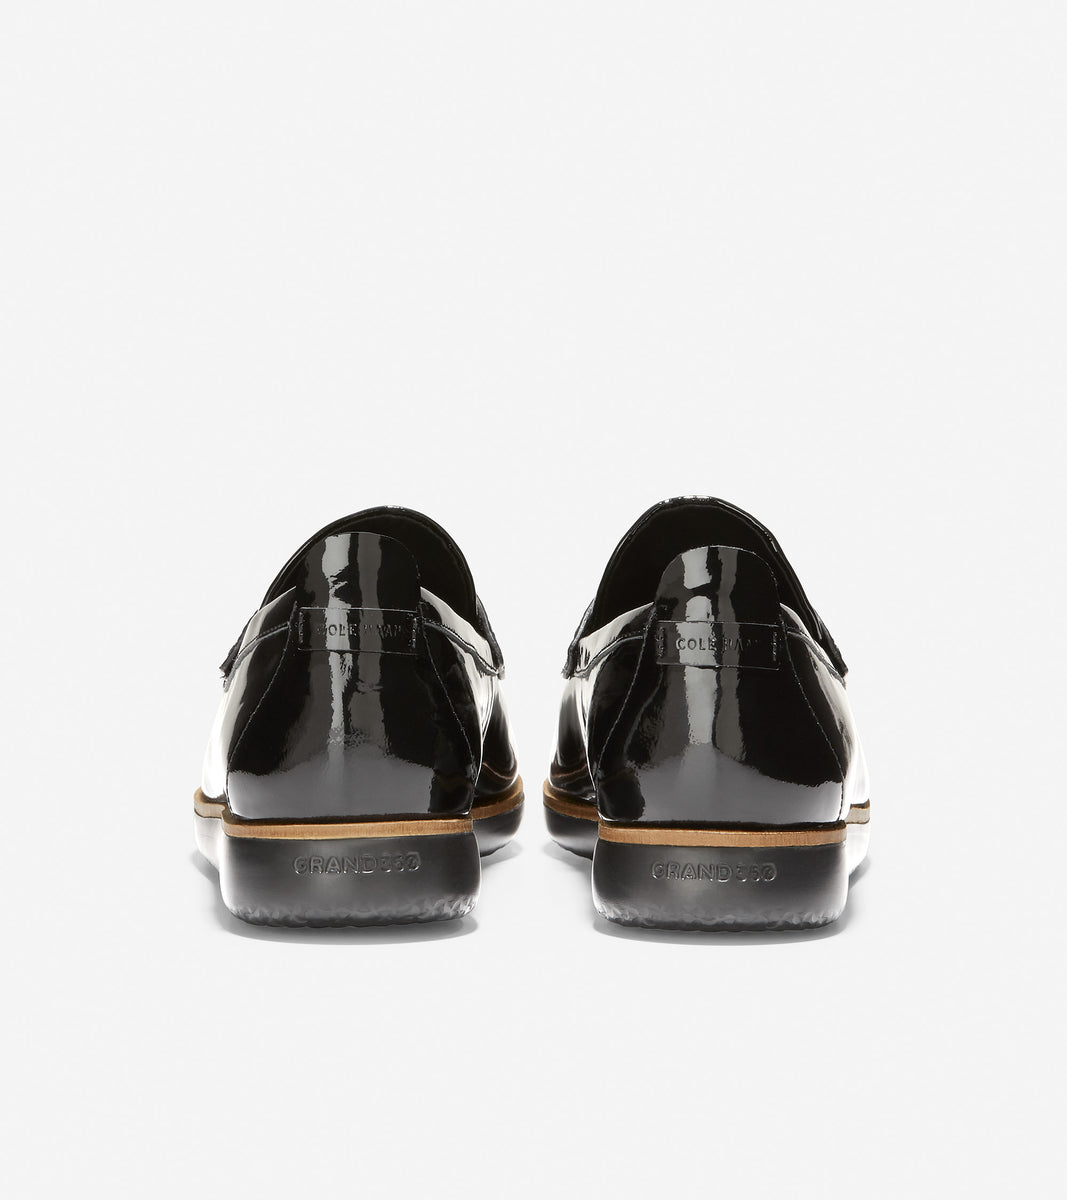 w22772-Grand Ambition Tolly Penny Loafer-Black Patent